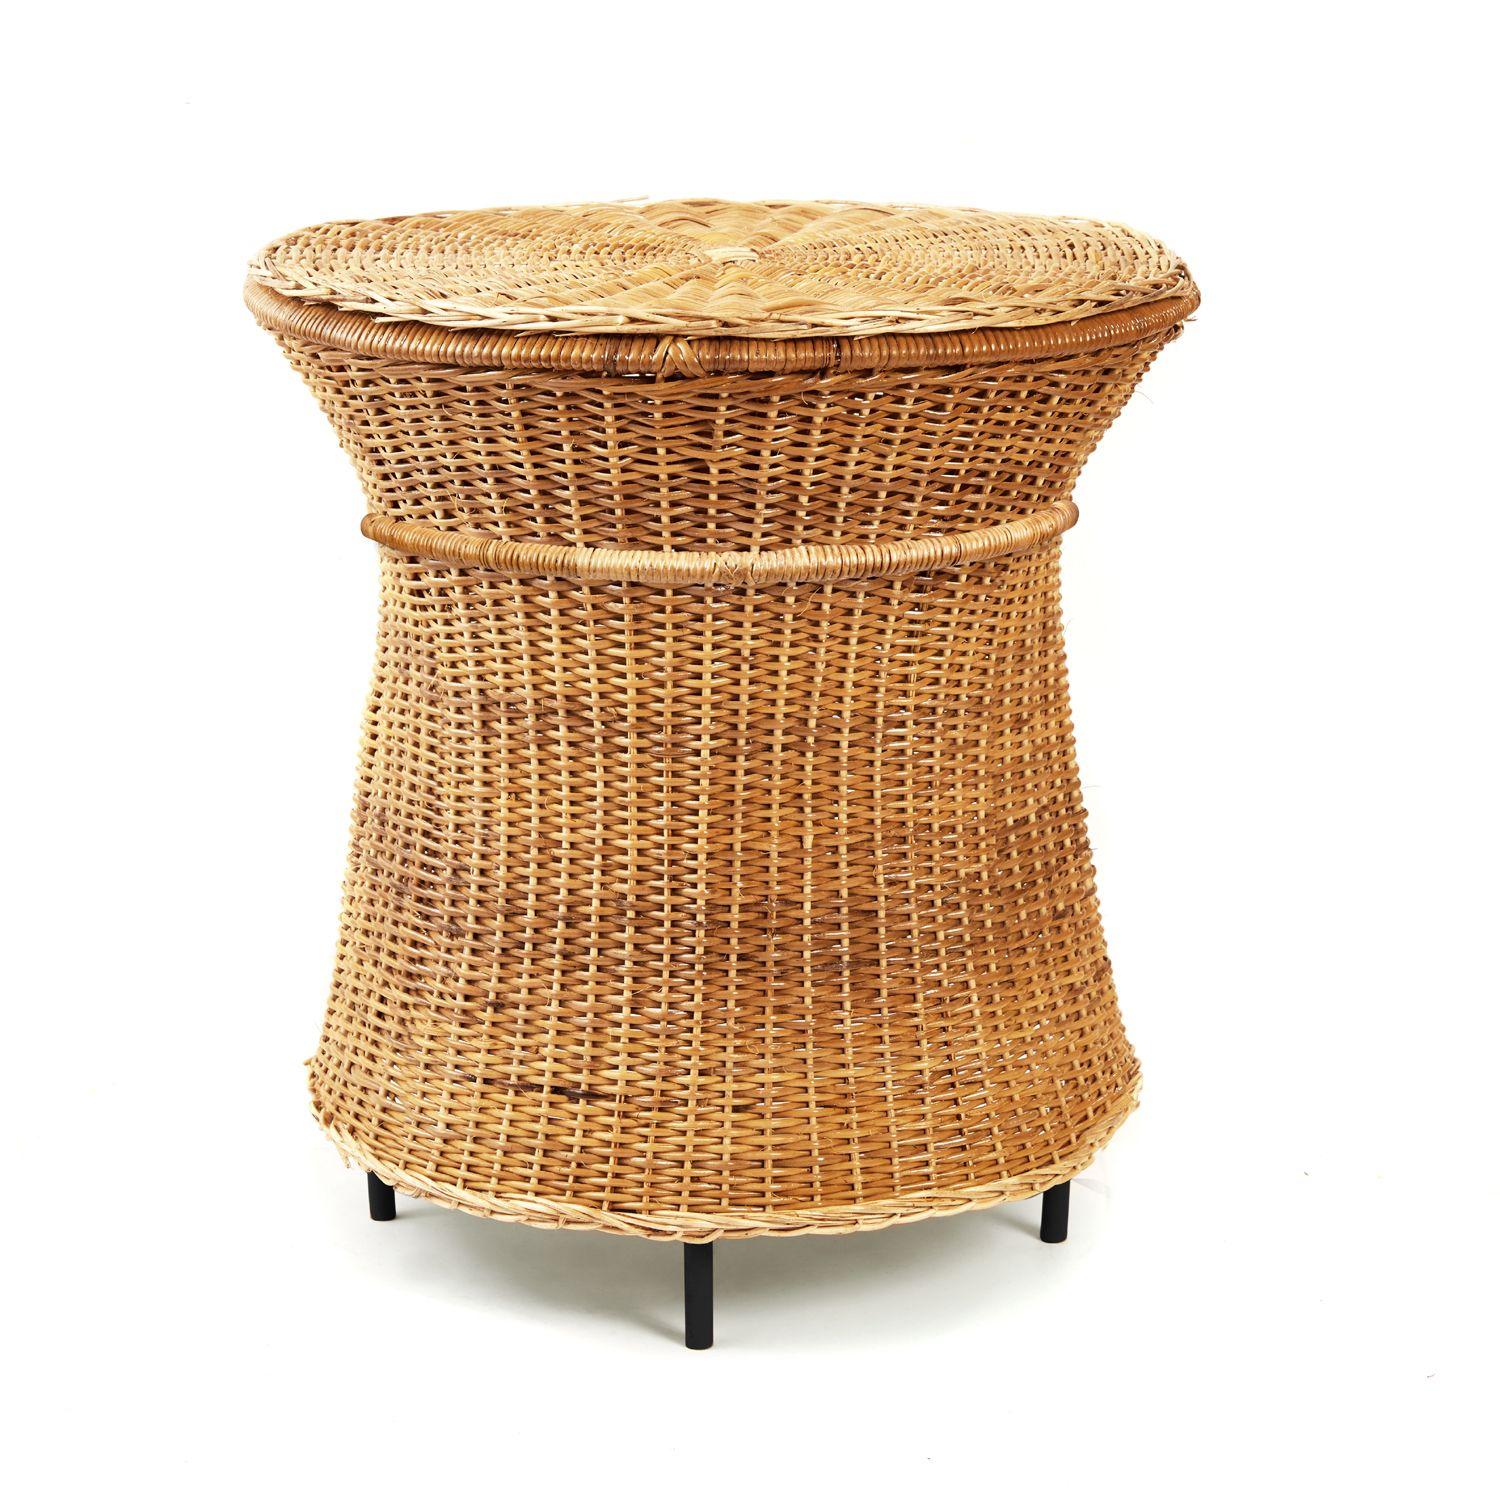 Caribe natural high table by Sebastian Herkner.
Materials: wicker from Bejuco roots. Galvanized and powder-coated tubular steel frame.
Technique: weaved by local craftspeople in Colombia. 
Dimensions: diameter 46.1 x height 50 cm.
Available in